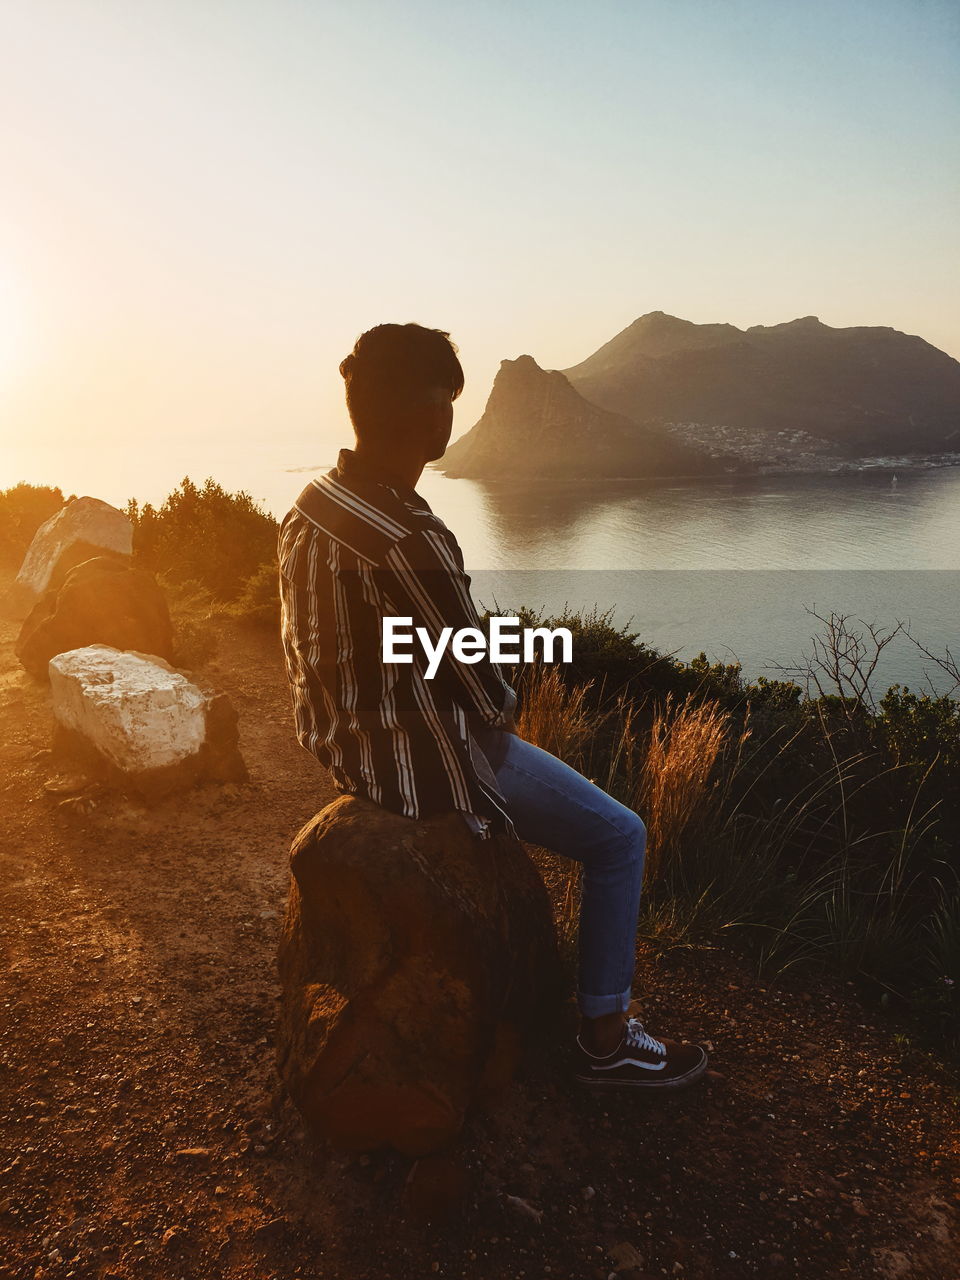 MAN SITTING ON ROCK LOOKING AT VIEW OF MOUNTAIN